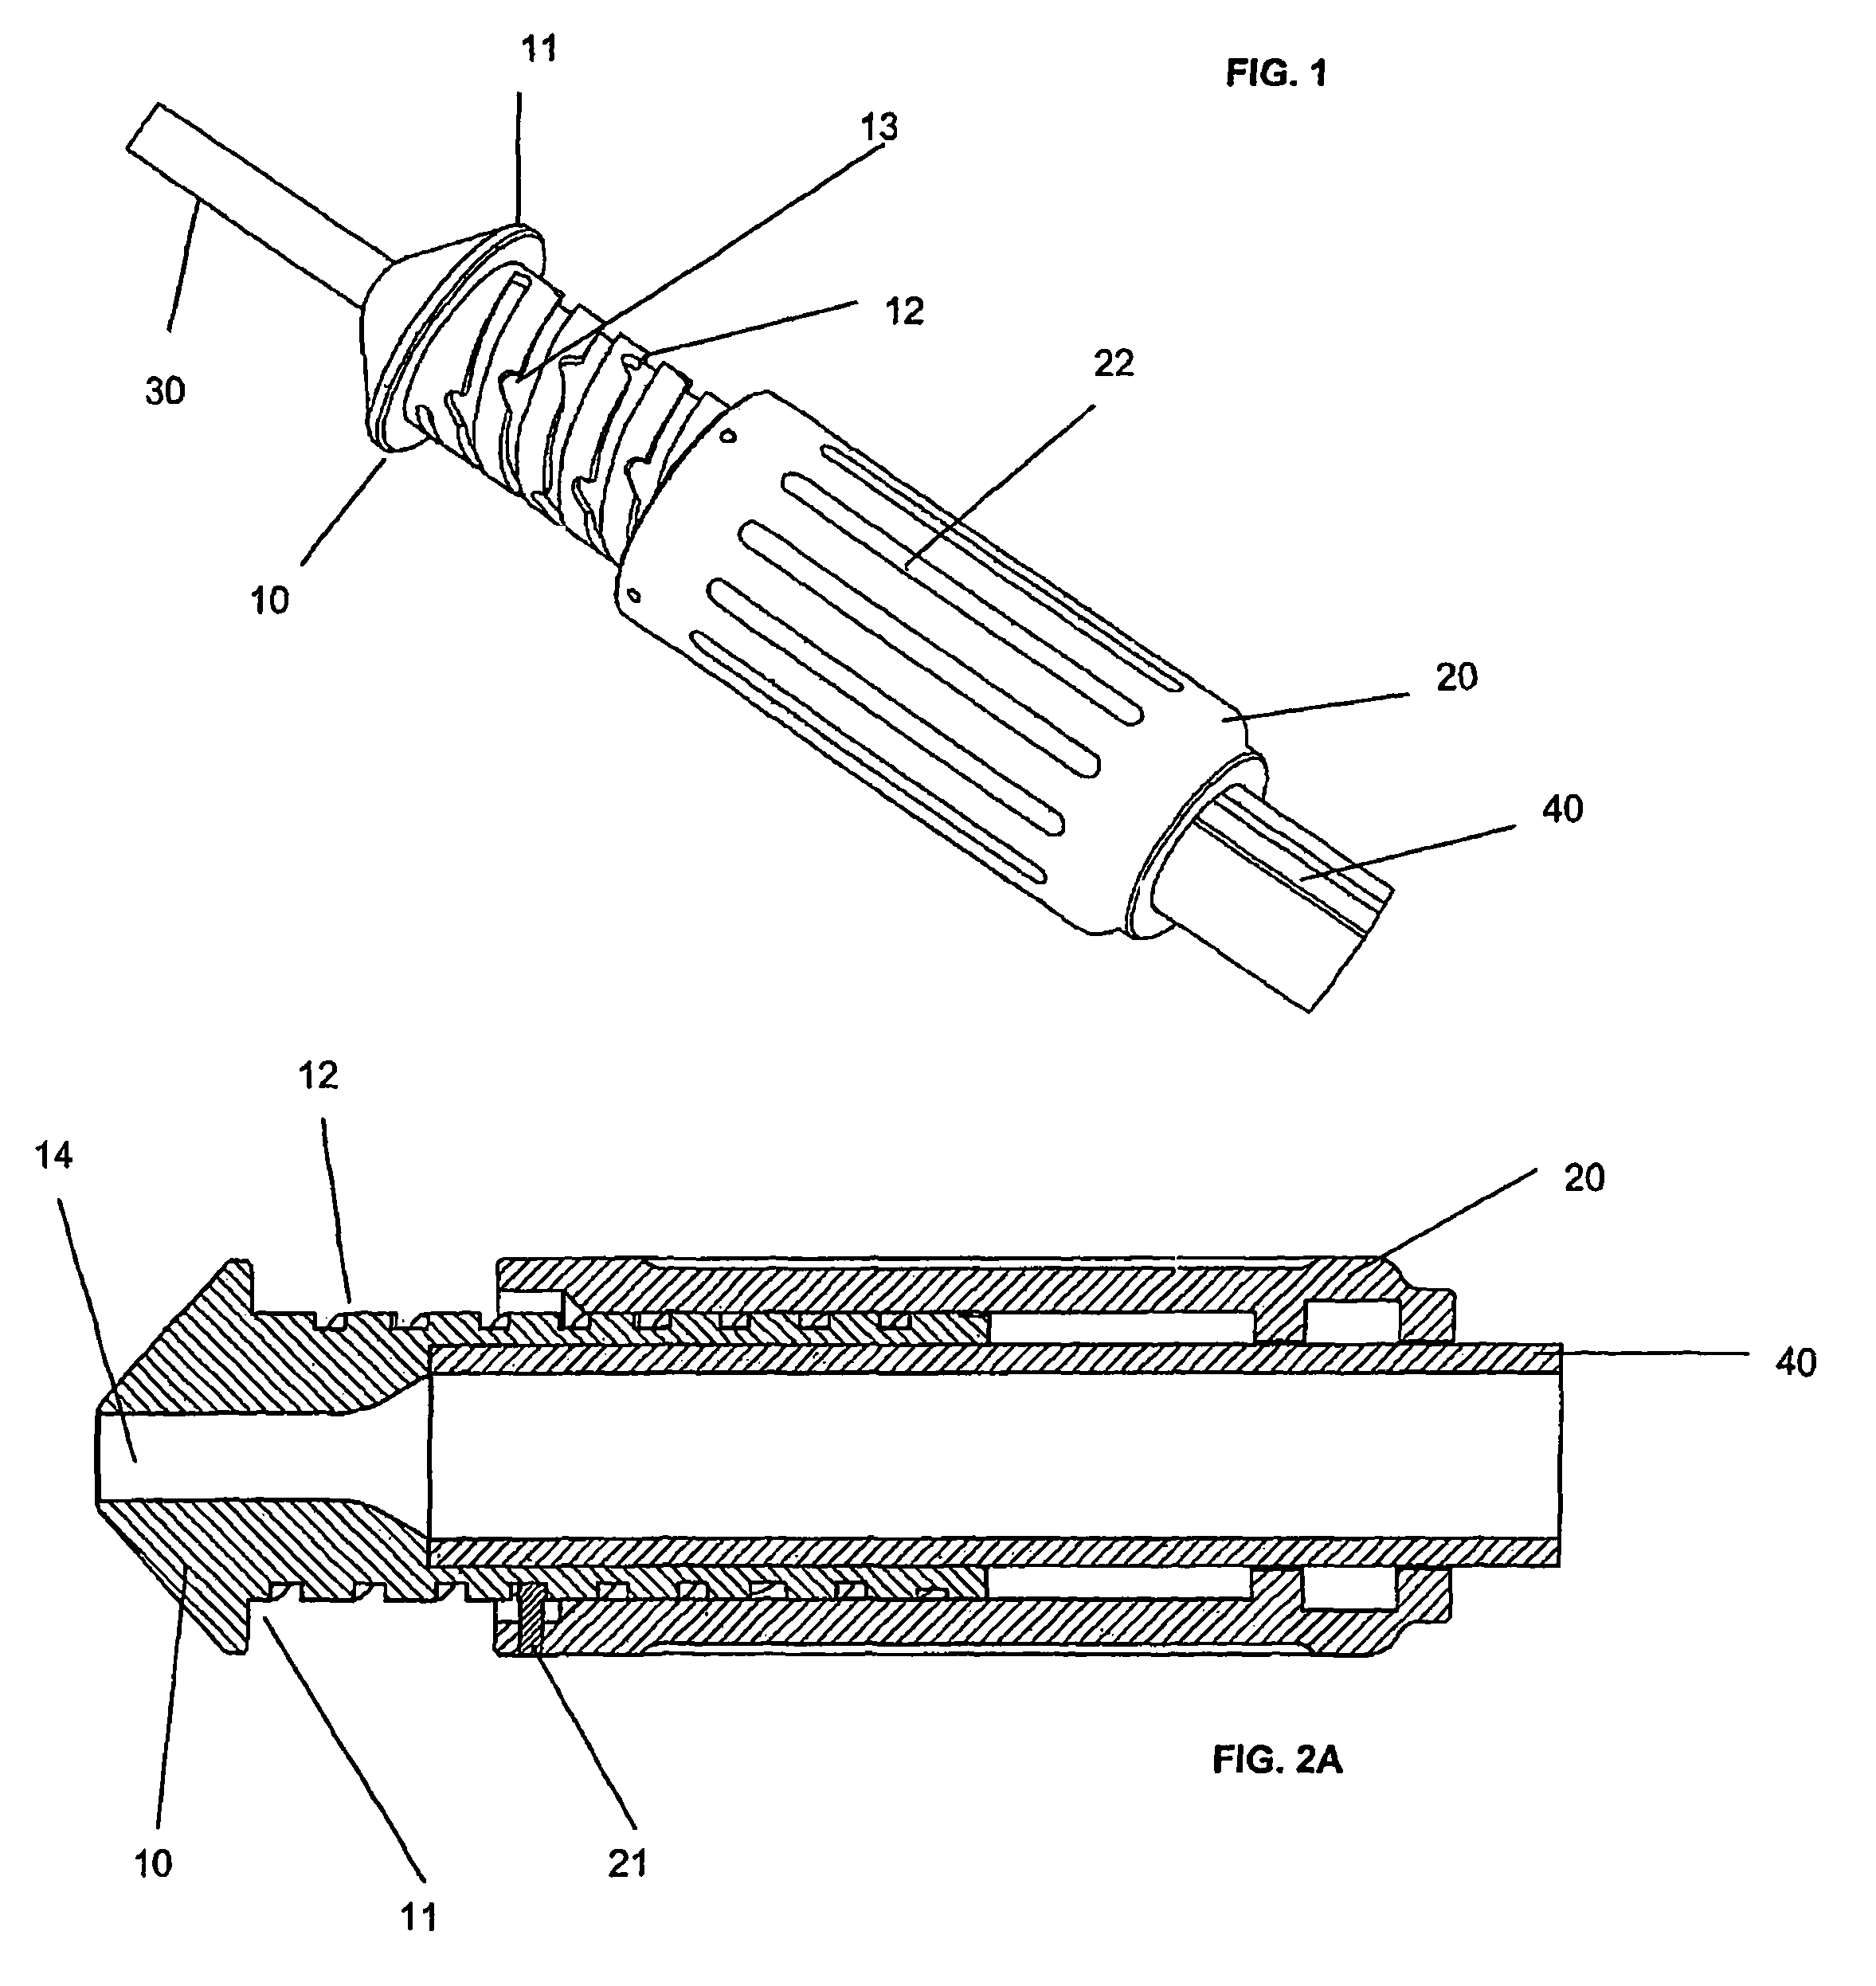 Control device for medical catheters